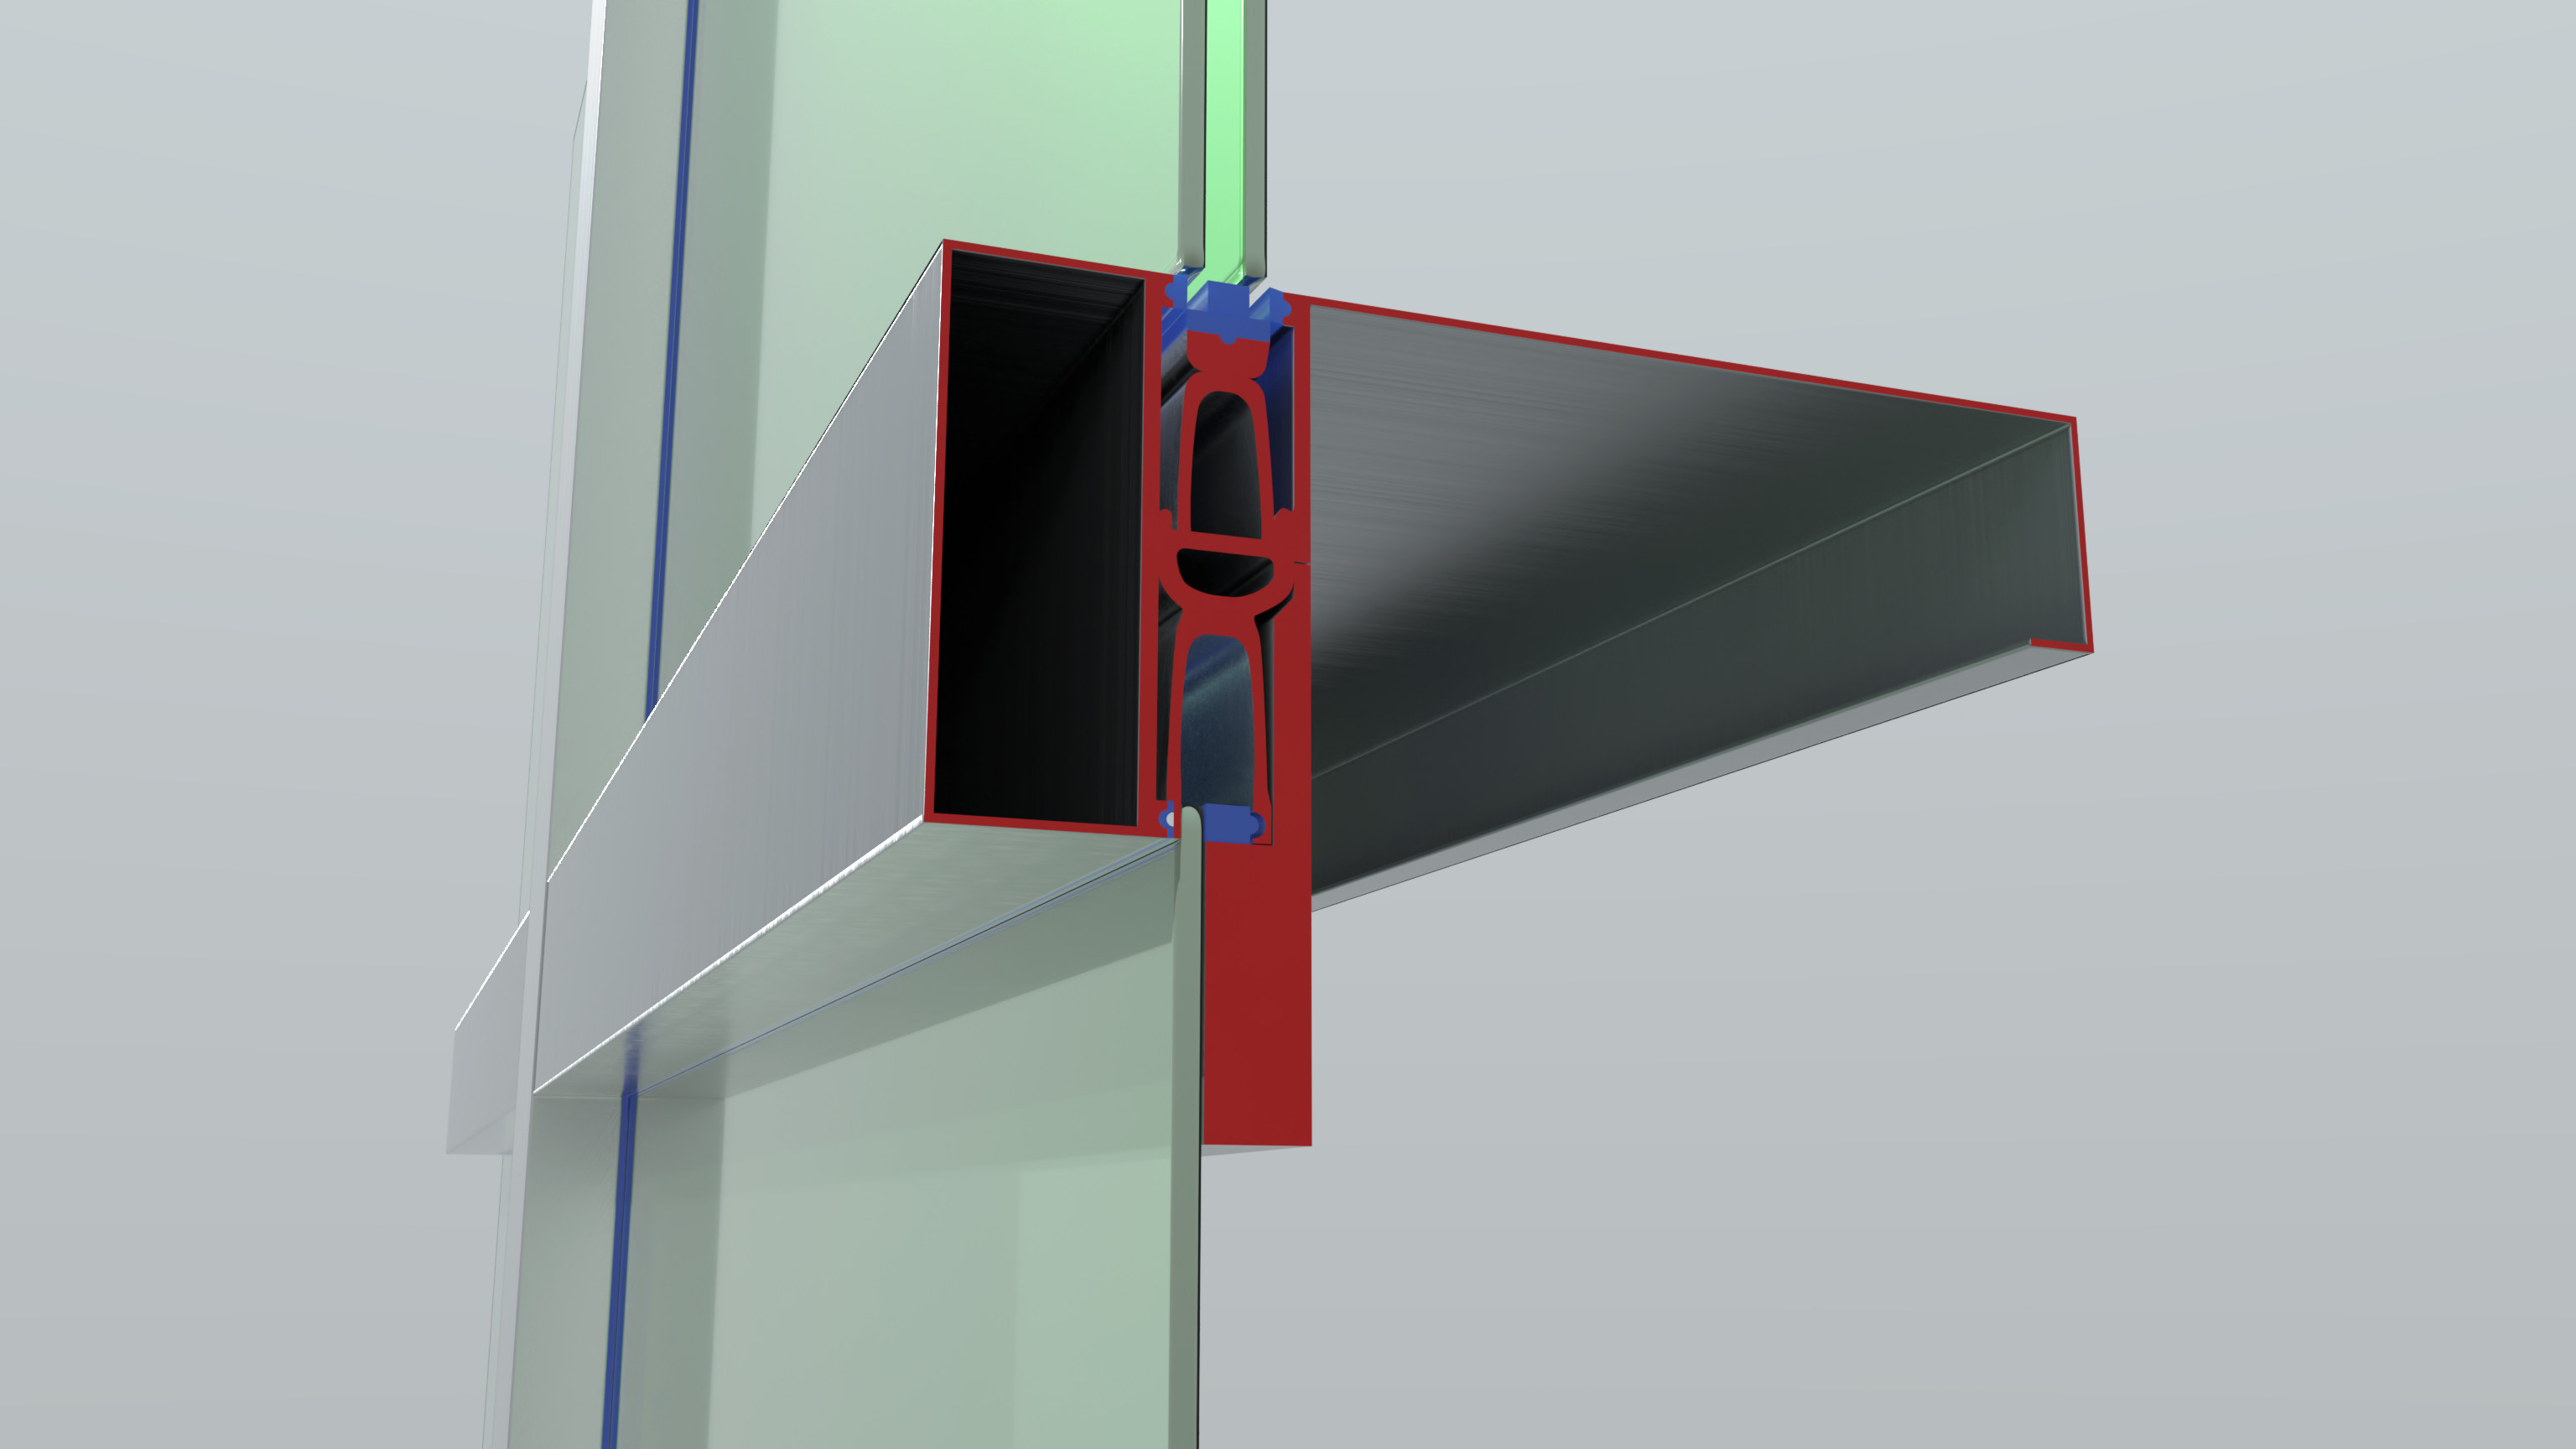 Façade system intersection with sectioned metal mullion profiles: architectural finish shaders